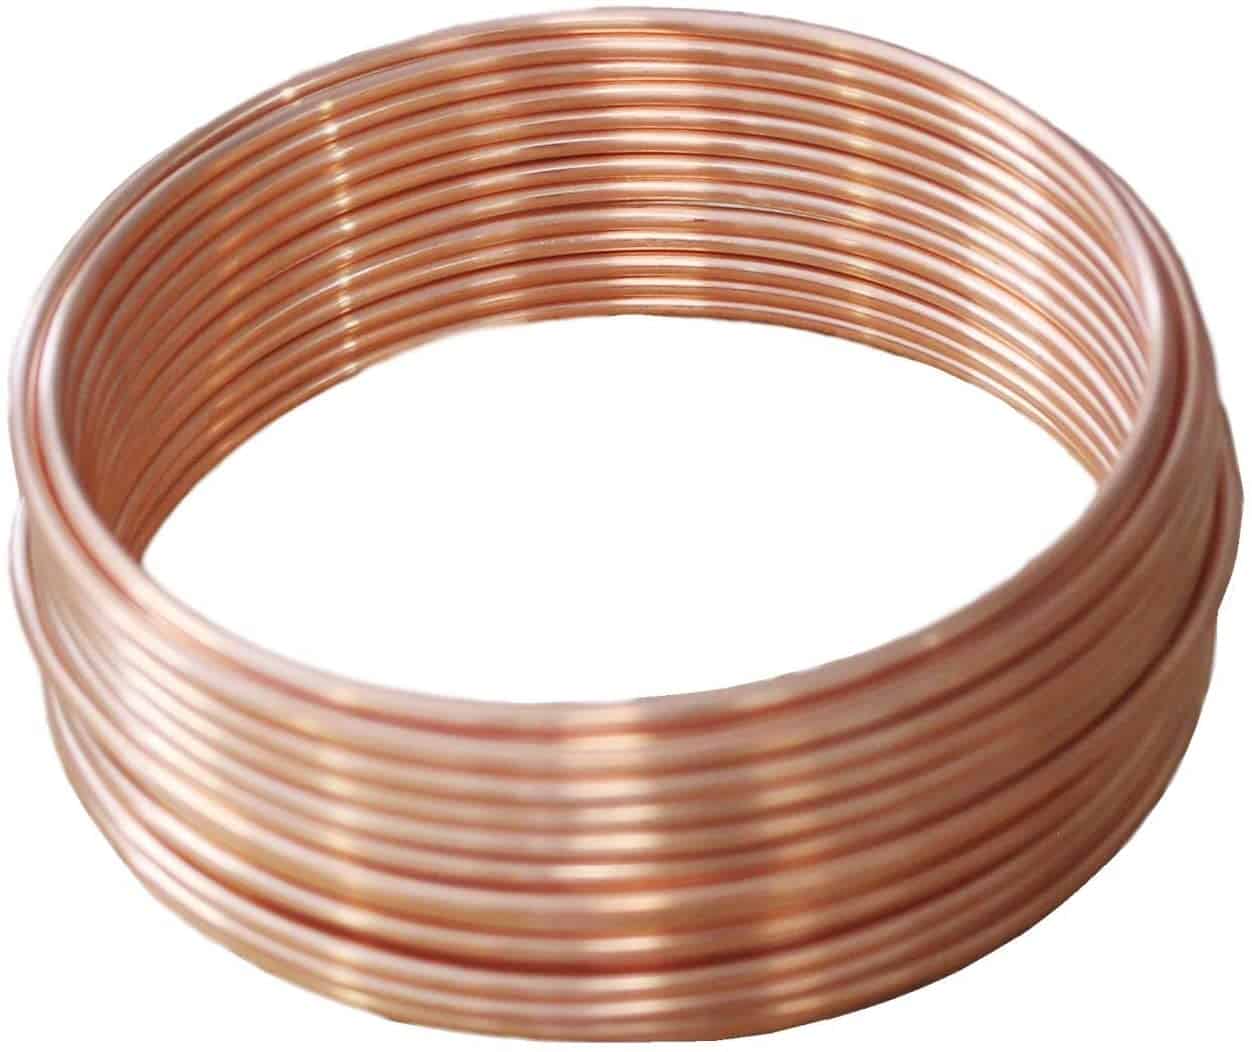 Best wire for clay stop motion characters & best copper wire: 16 AWG copper ground wire